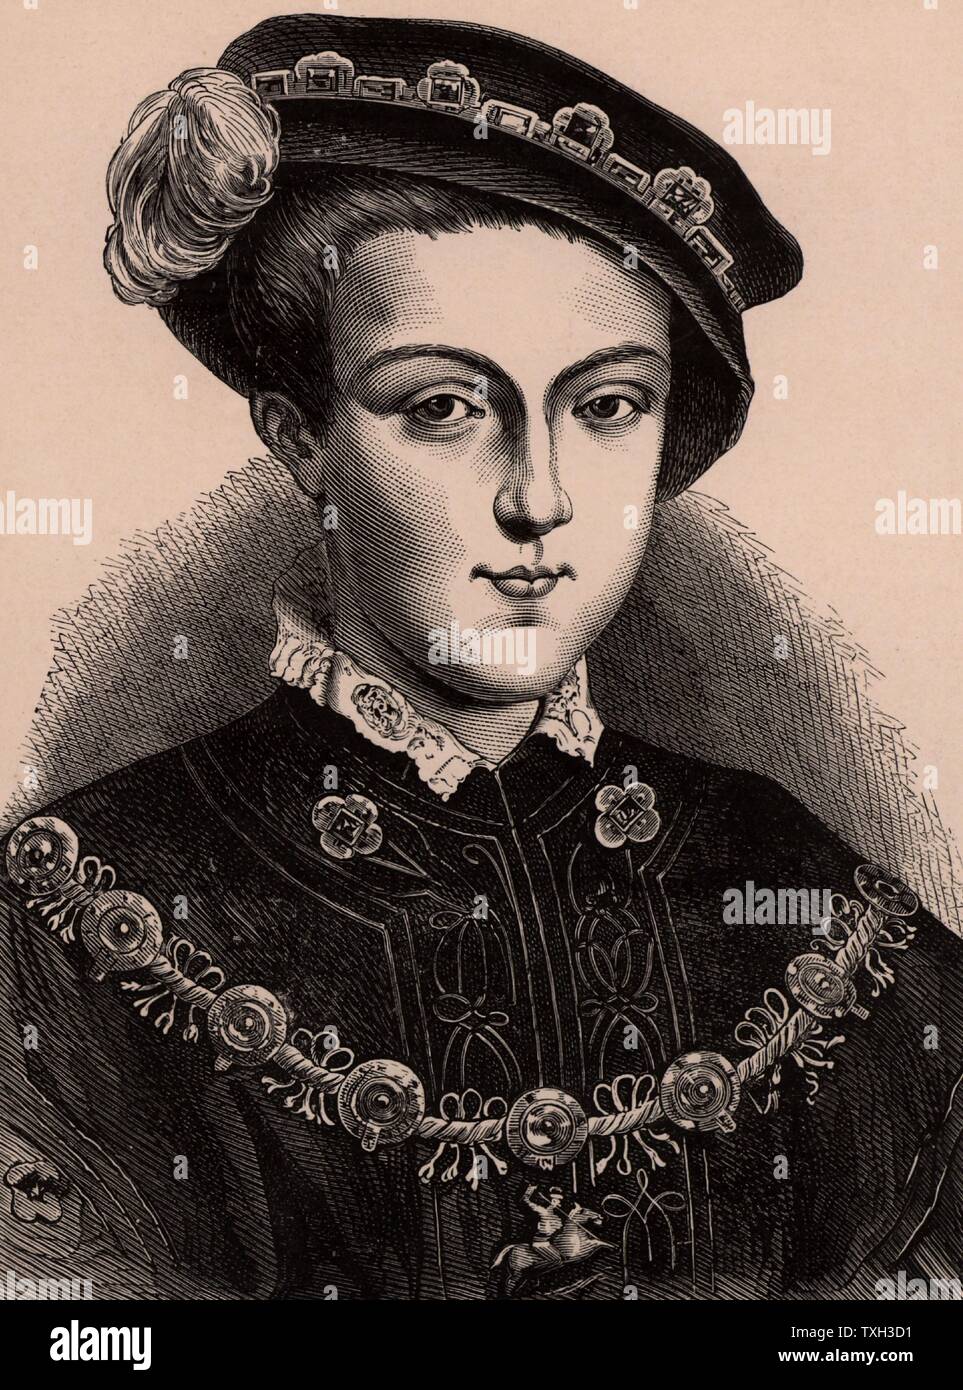 Edward VI (1537-1553) king of England and Ireland from 1547. Son of Henry VIII and his third wife, Jane Seymour.  Always a sickly child, he died of natural causes.  A member of the Tudor dynasty.   Wood engraving c1900. Stock Photo